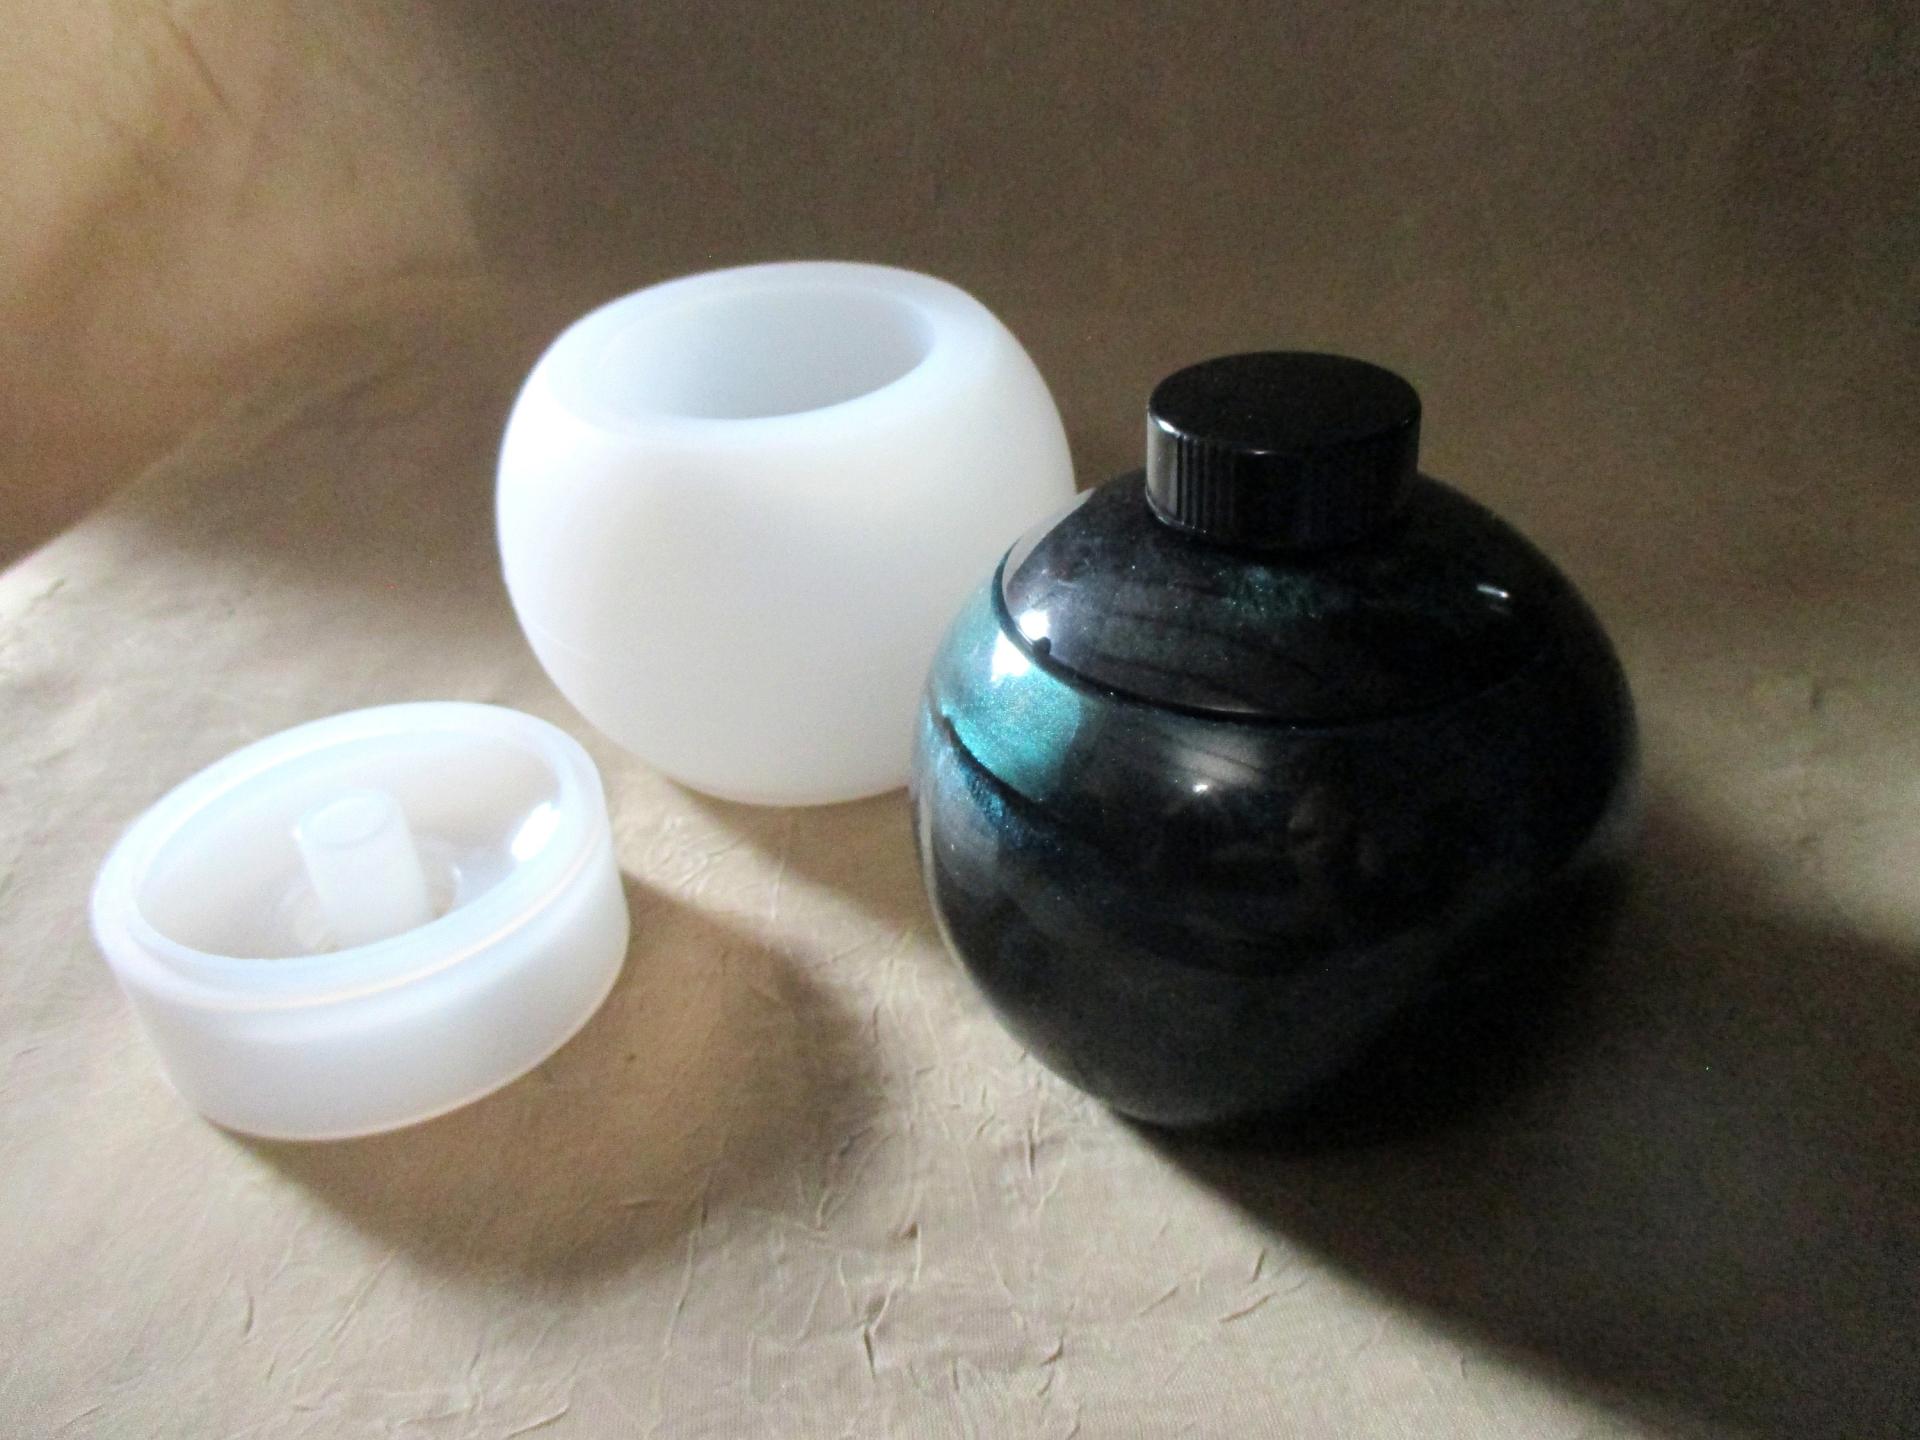 Mold - Large Bubble Bottle Casting Mold - for Epoxy, Clay, concrete, or other casting medium